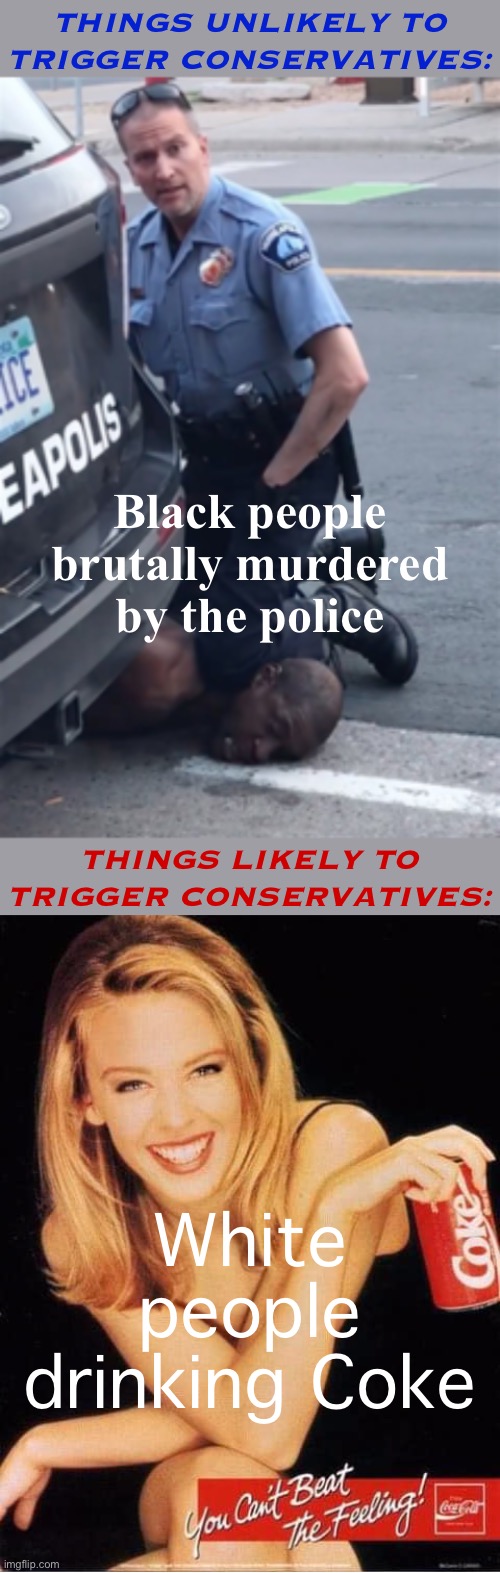 it really do be like that | THINGS UNLIKELY TO TRIGGER CONSERVATIVES:; Black people brutally murdered by the police; THINGS LIKELY TO TRIGGER CONSERVATIVES:; White people drinking Coke | image tagged in george floyd,kylie coke,white people,police brutality,coke,share a coke with | made w/ Imgflip meme maker